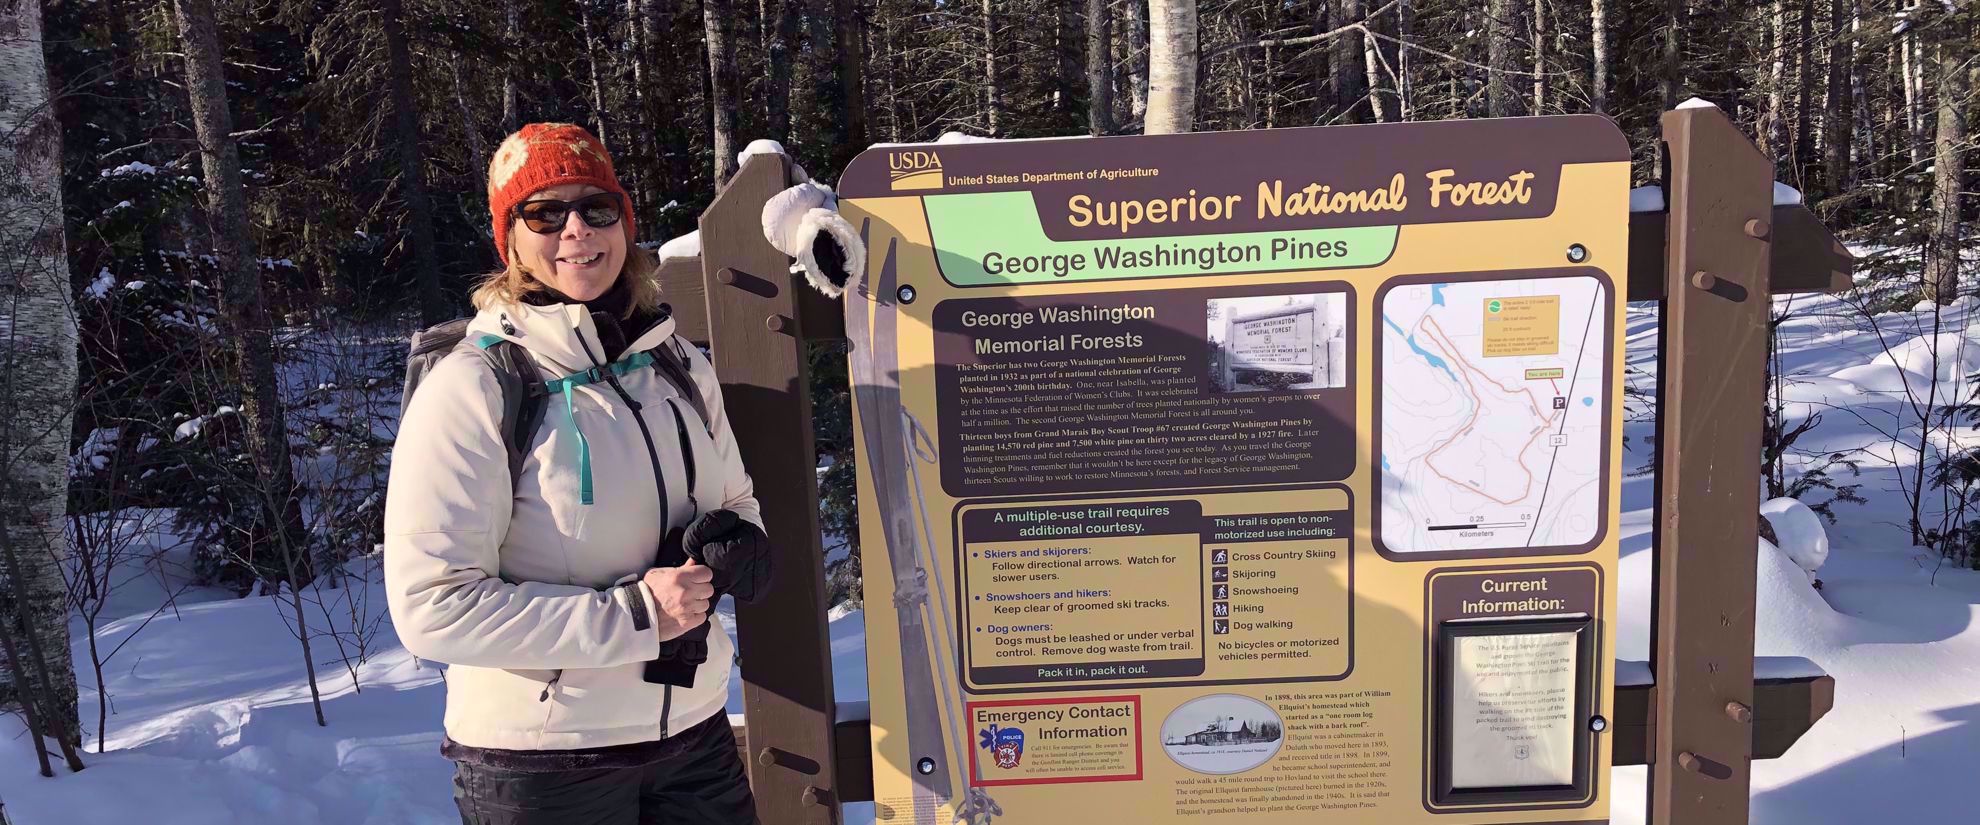 woman standing by superior national forest george washington pines sign